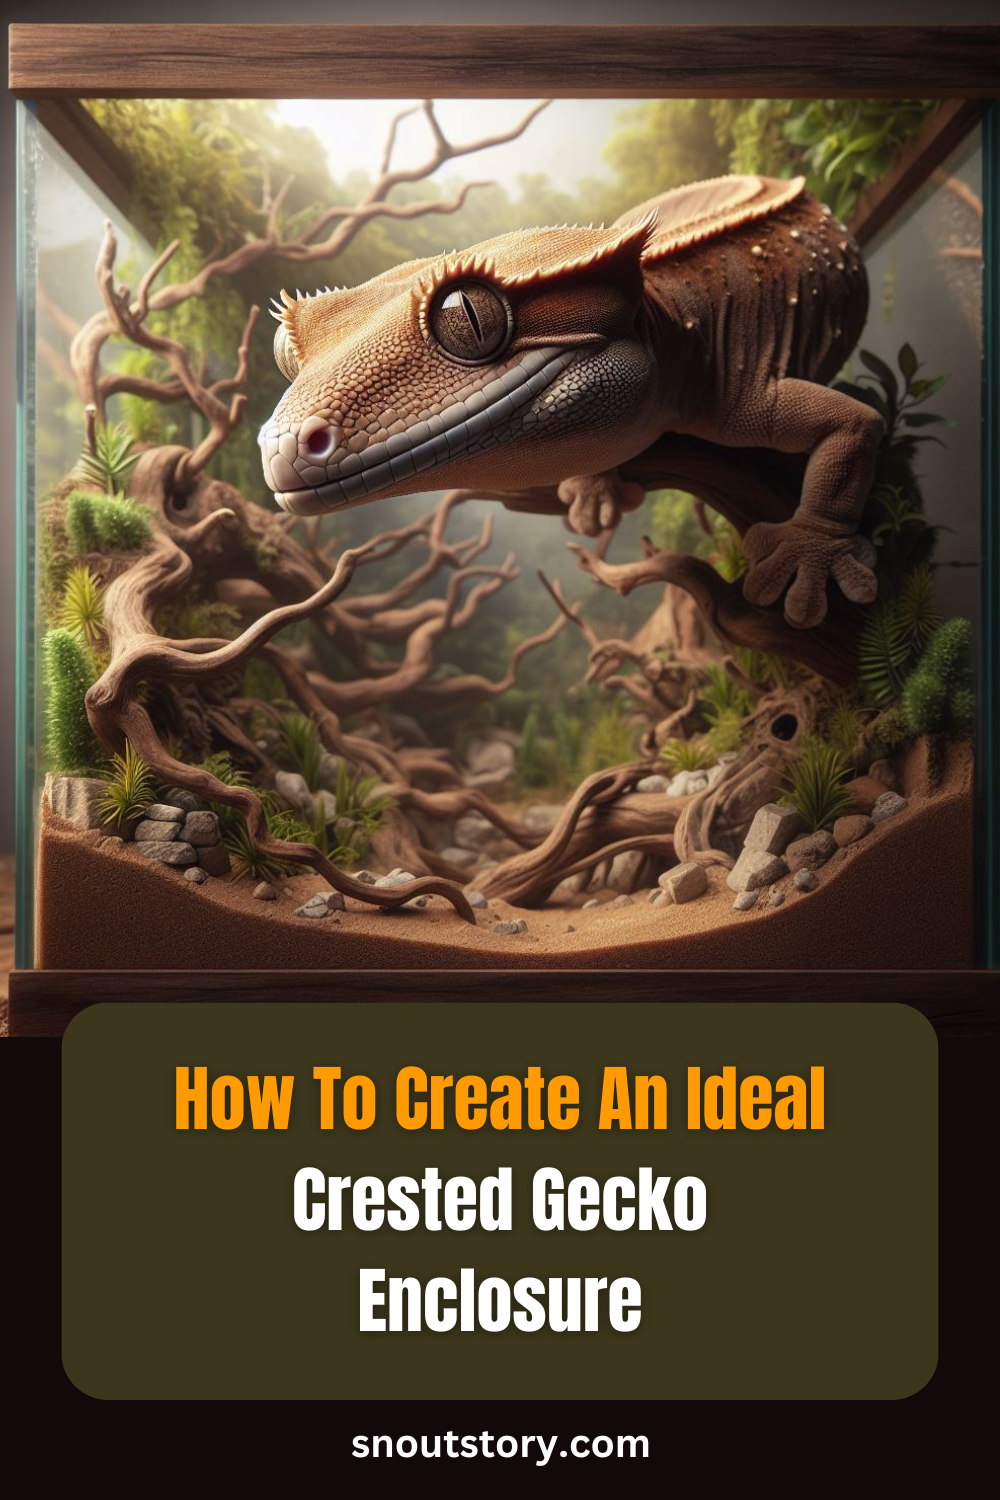 How to create an ideal enclosure for crested gecko